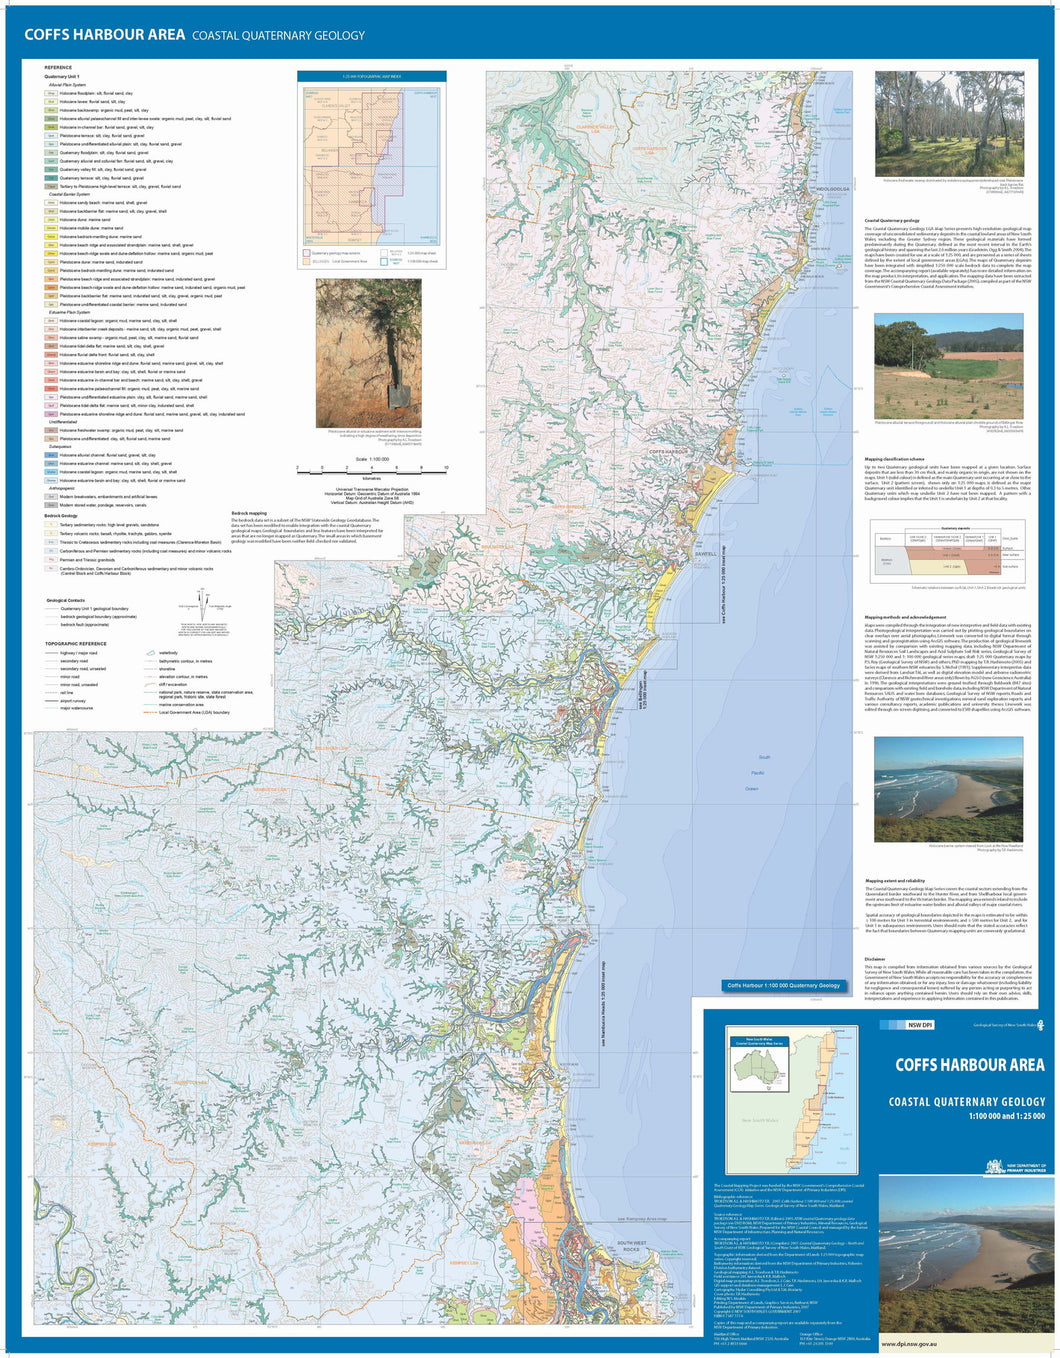 Image of Coffs Harbour Area Coastal Quaternary Geology map